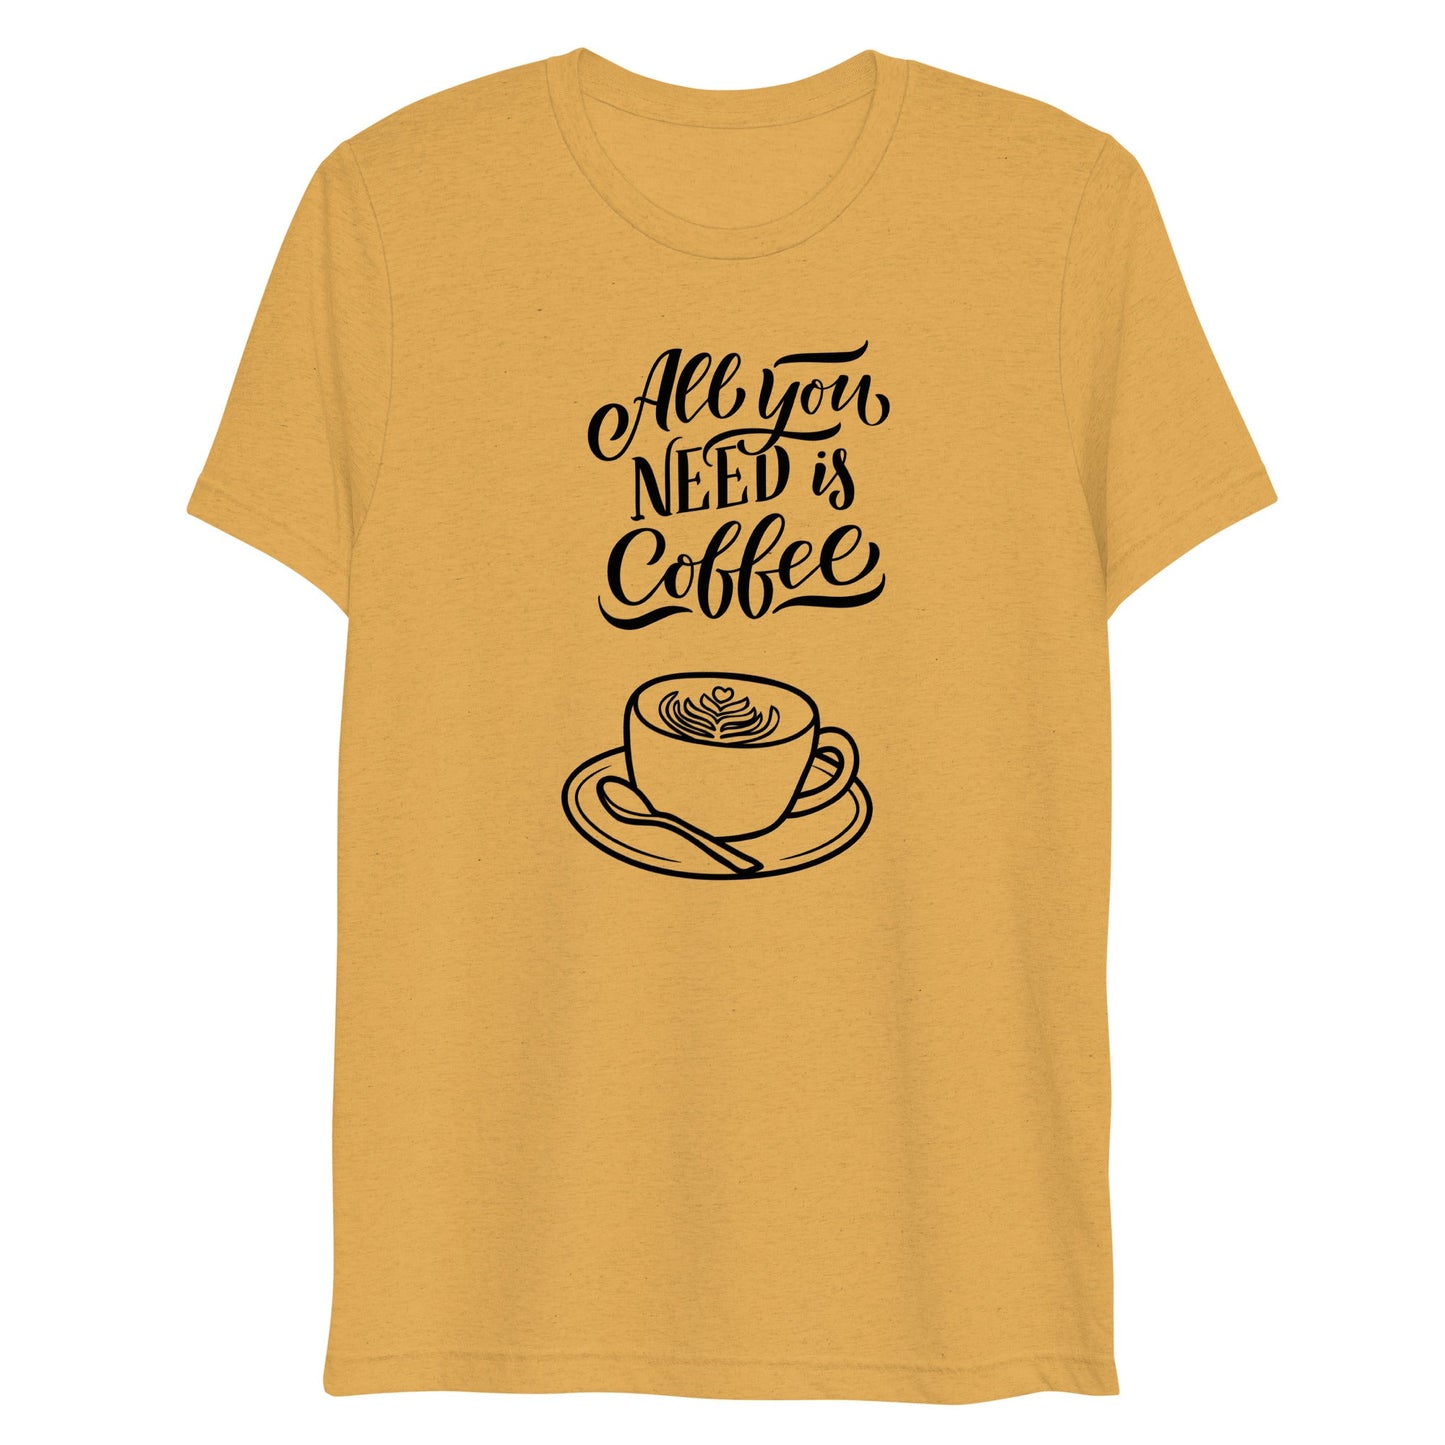 All You Need Is Coffee T-Shirt - ShopJeanPhotography.com